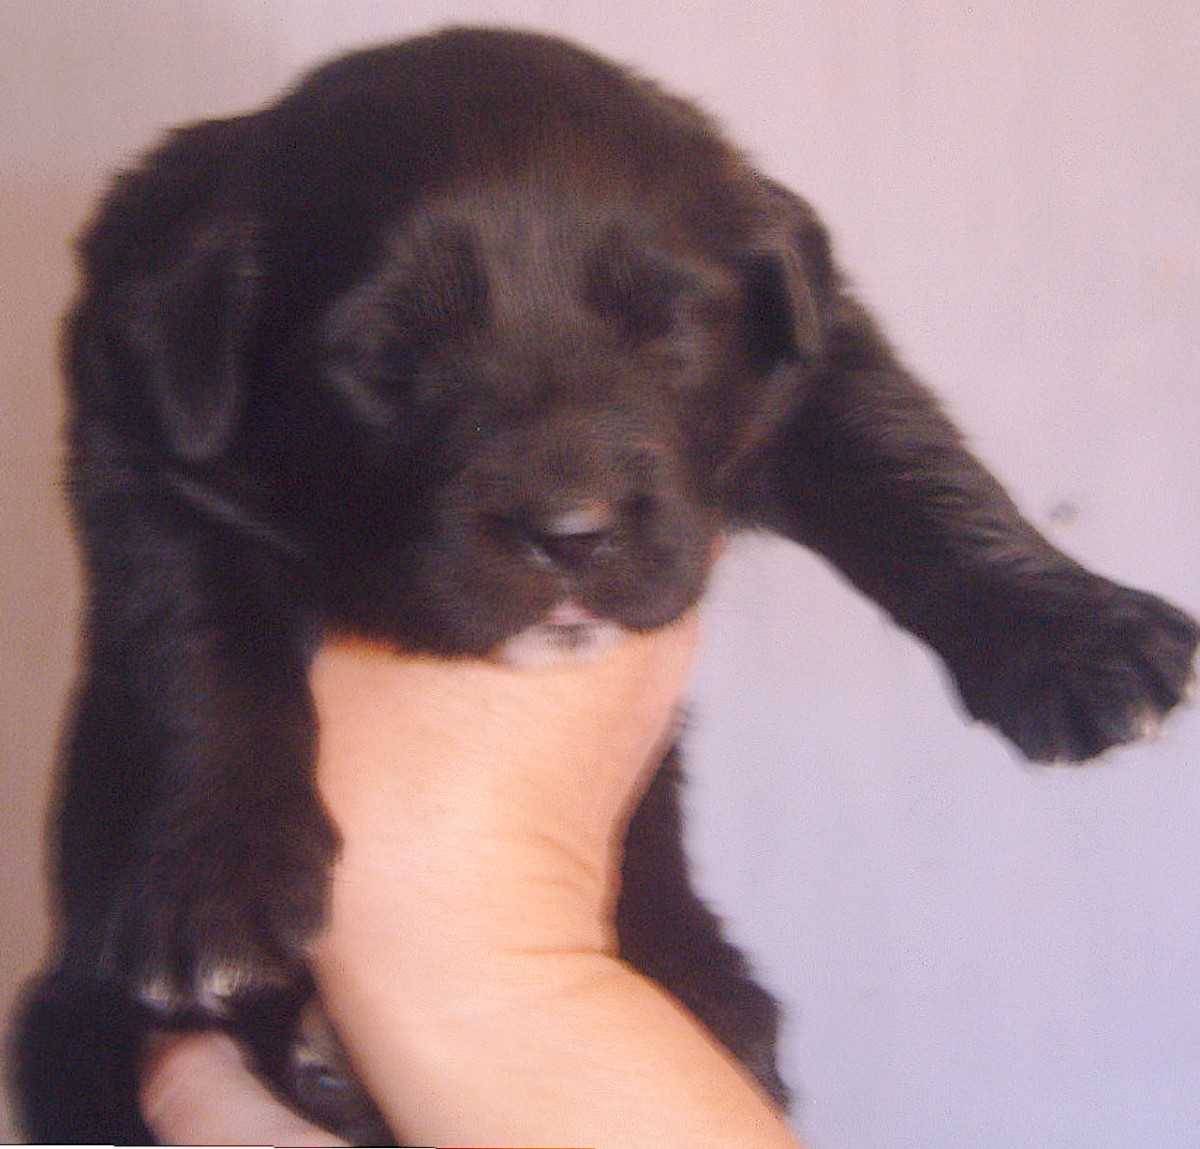 Maggie Magz at 3 weeks old